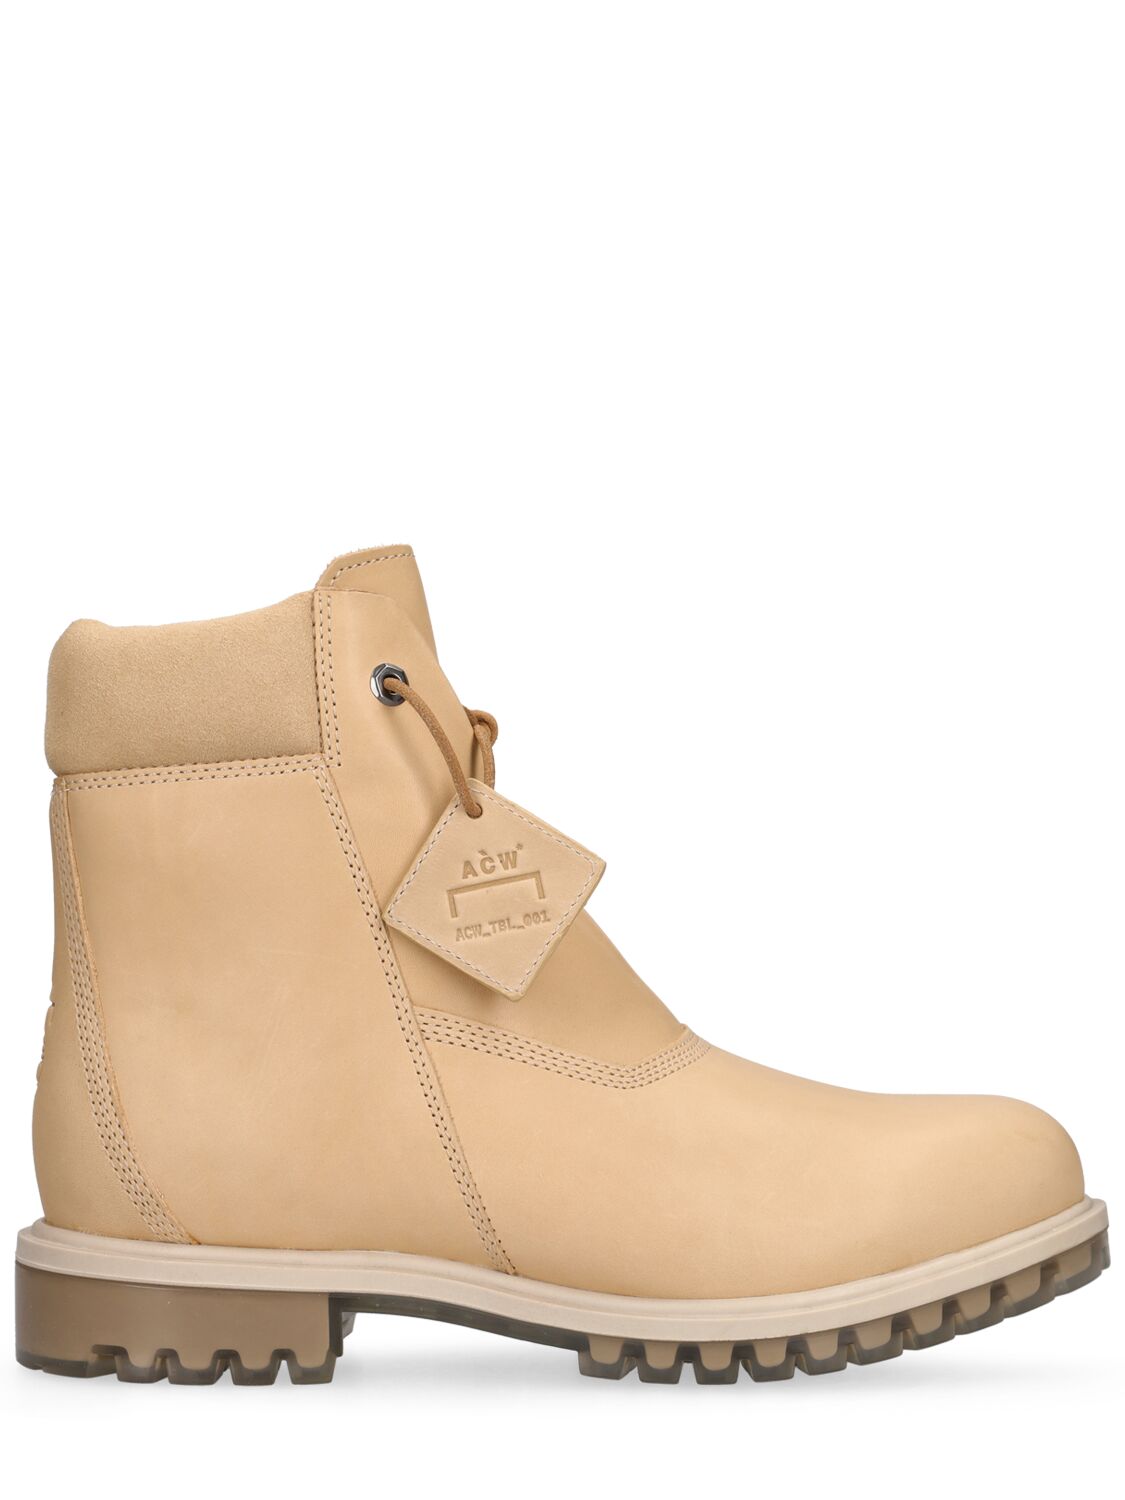 A-COLD-WALL* X TIMBERLAND OUTDOOR BOOTS